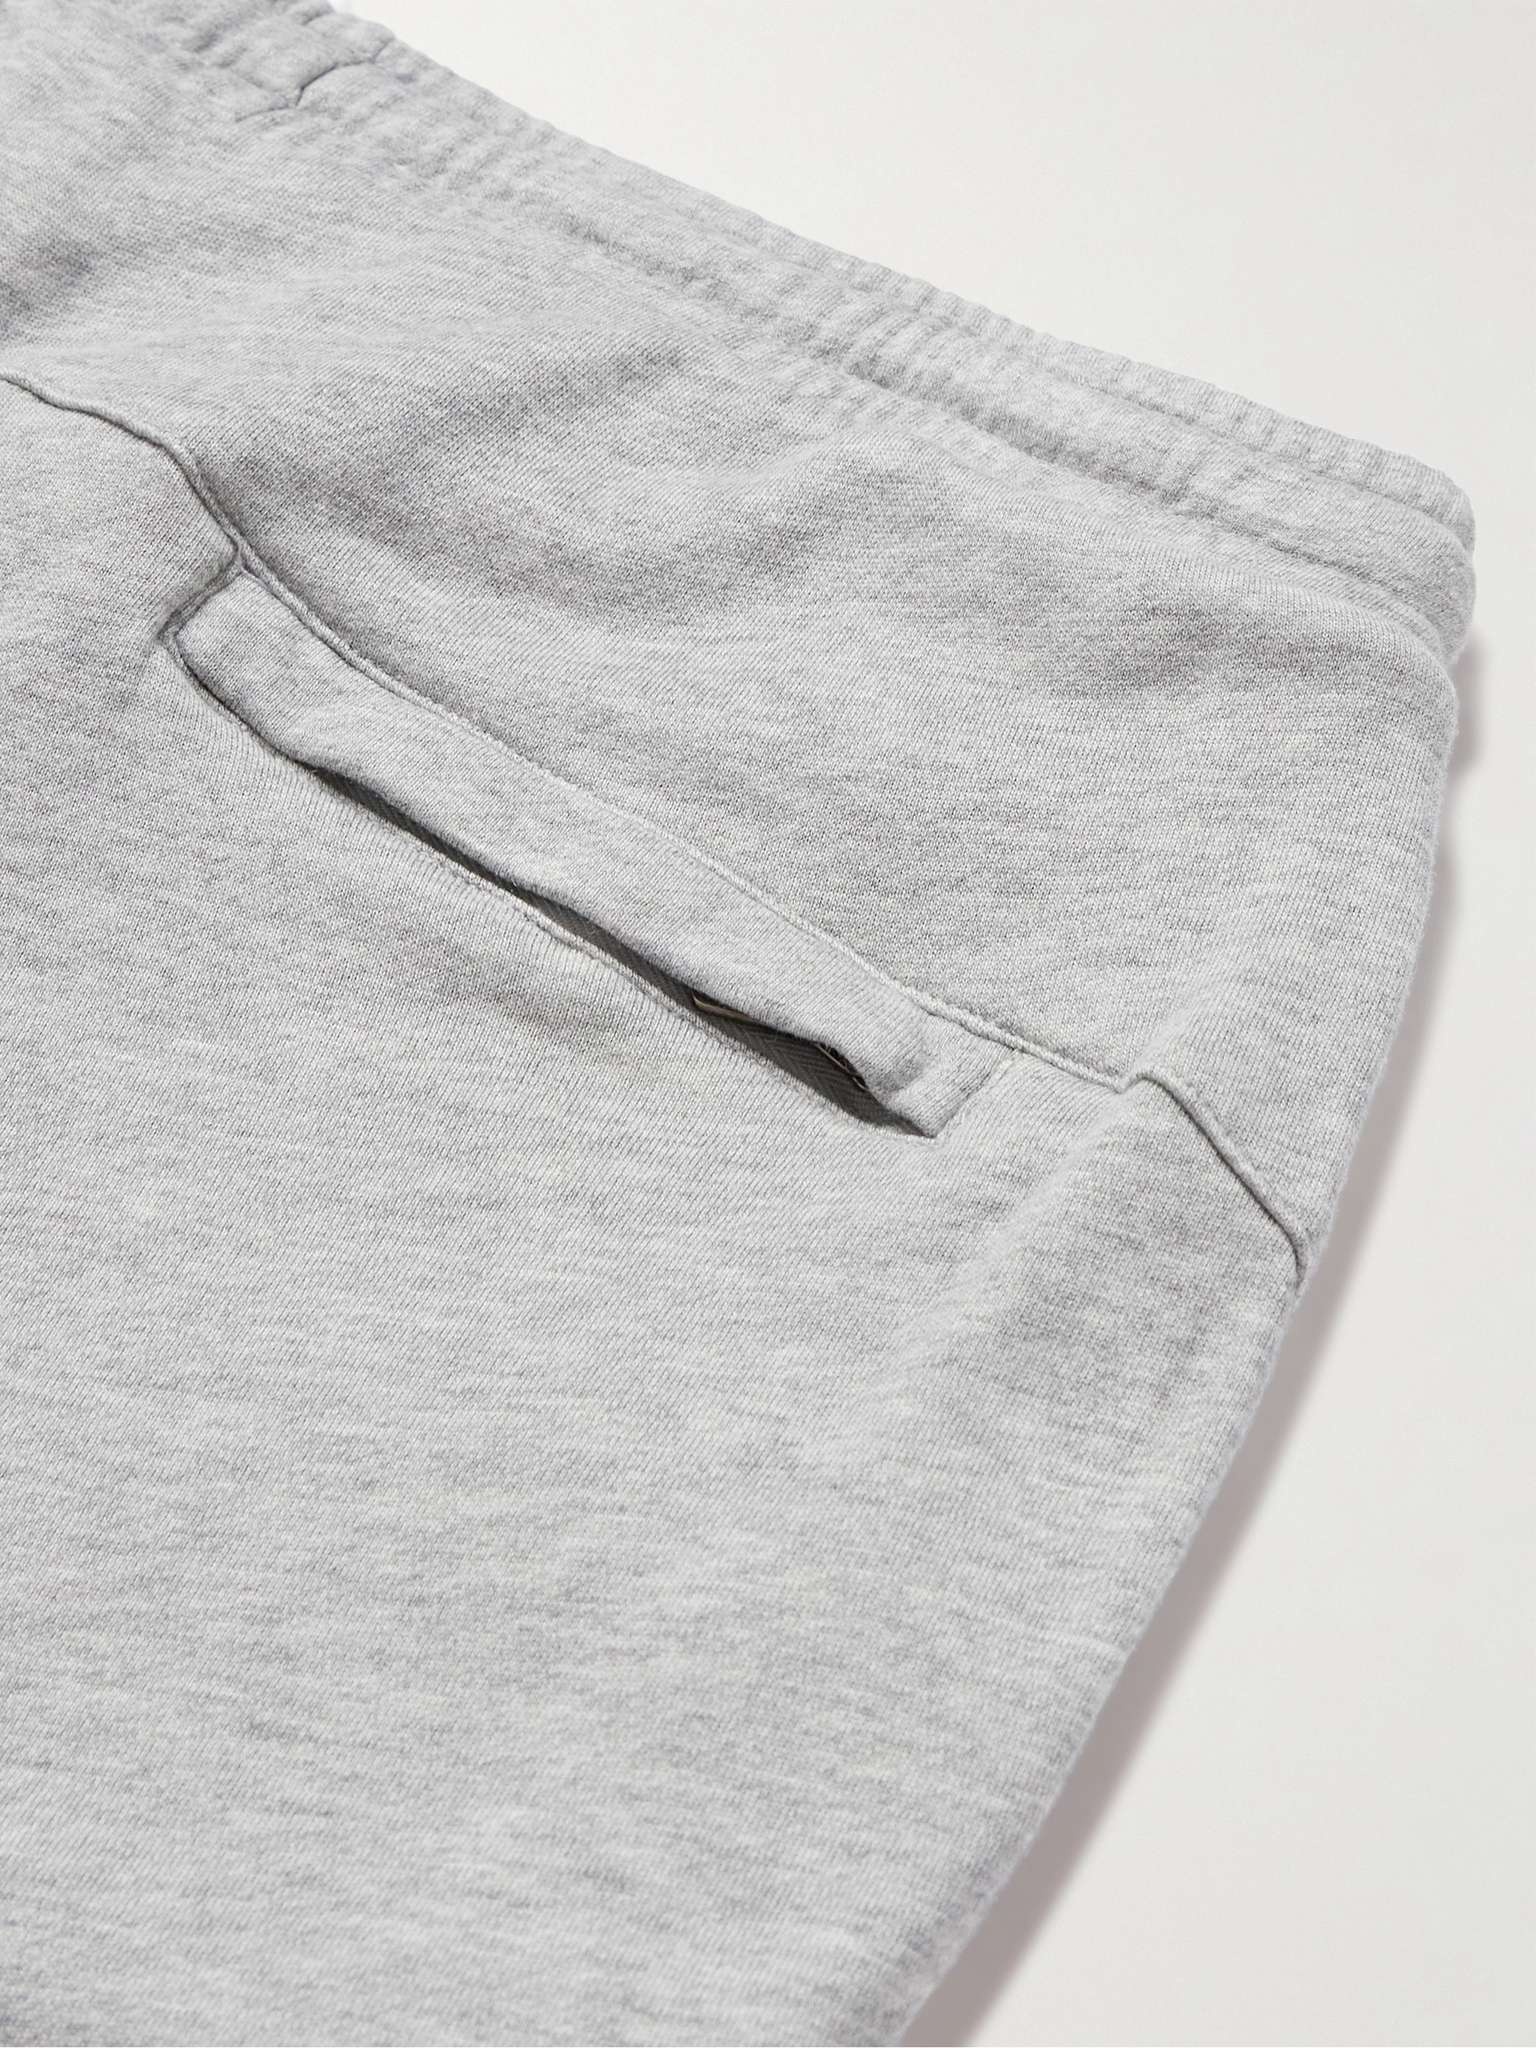 Quinn 1 Tapered Cotton and Modal-Blend Jersey Sweatpants - 3